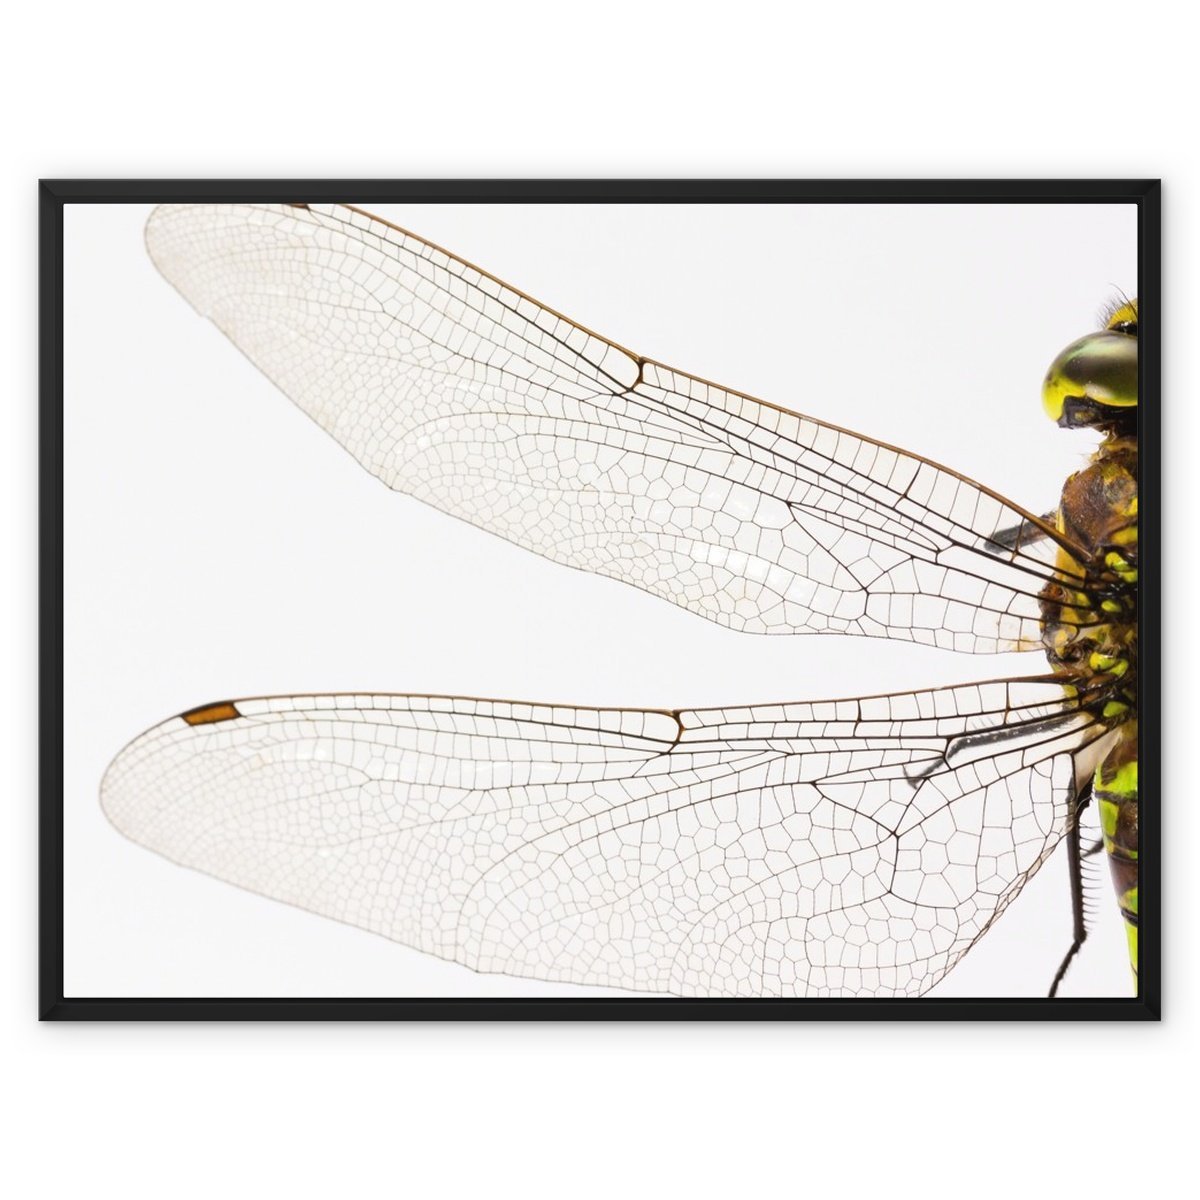 Spread Your Wings 3 - Animal Canvas Print by doingly